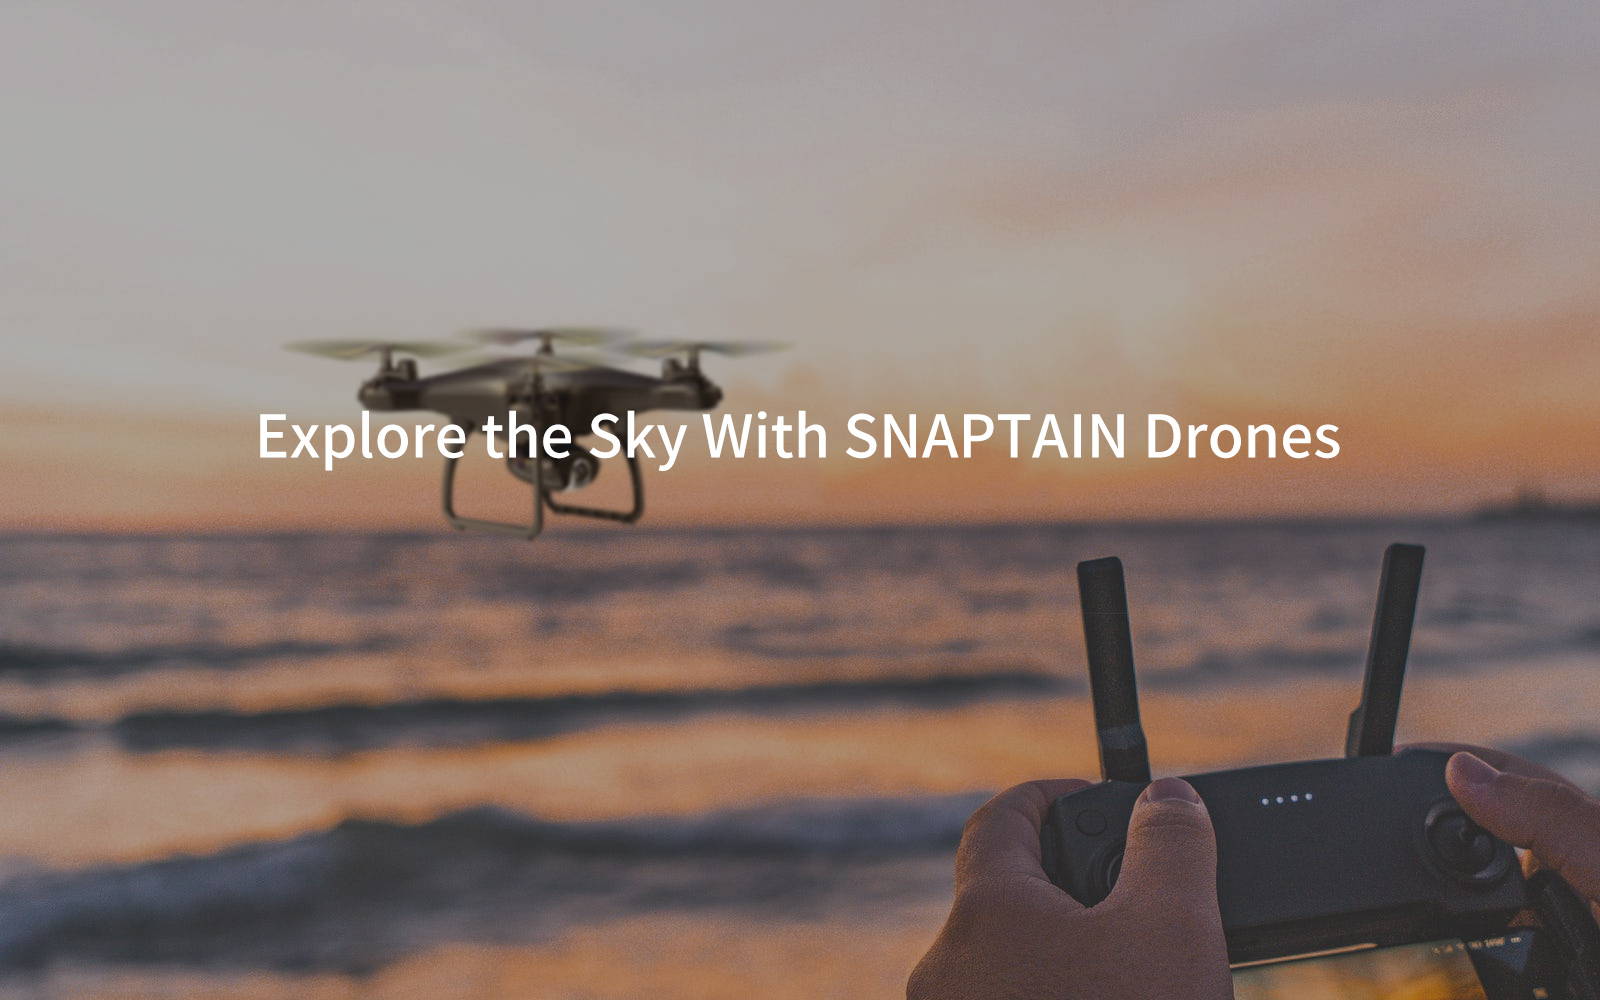 Explore the Sky with Snaptain Drone